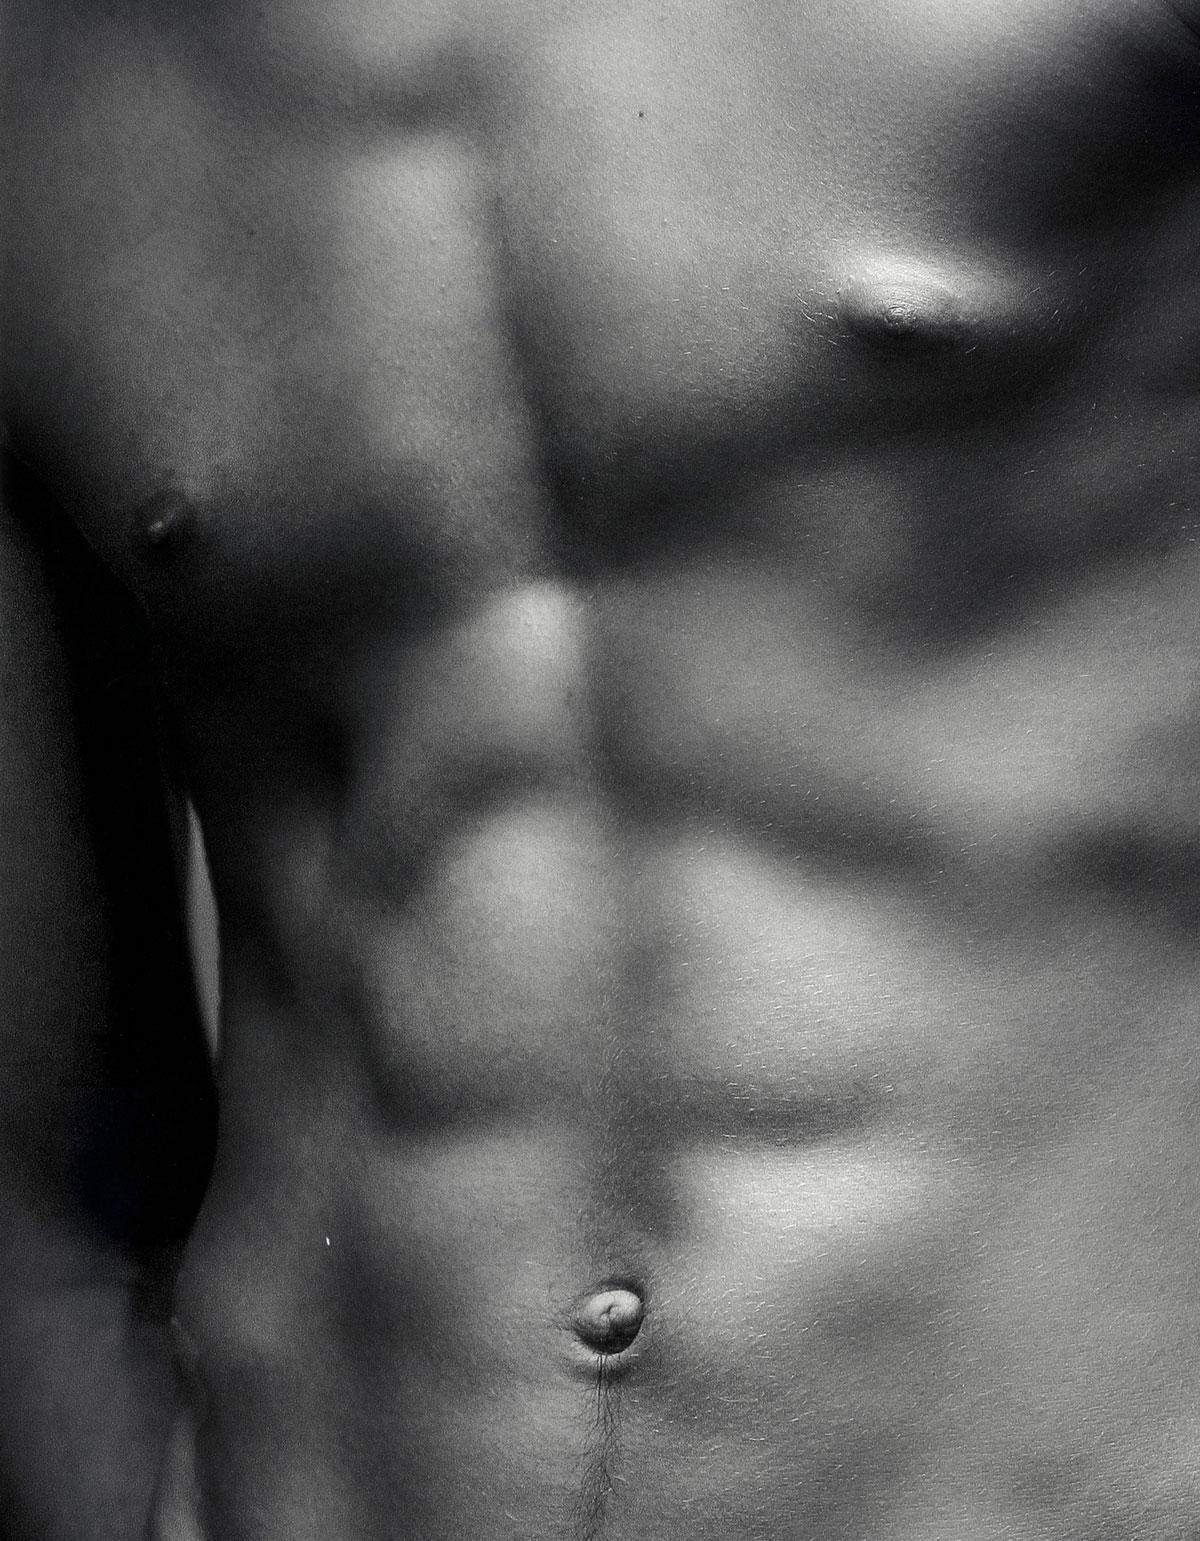 Mohamed (Magnificent sculpted abs of a young Czech maleI - Photograph by Benno Thoma